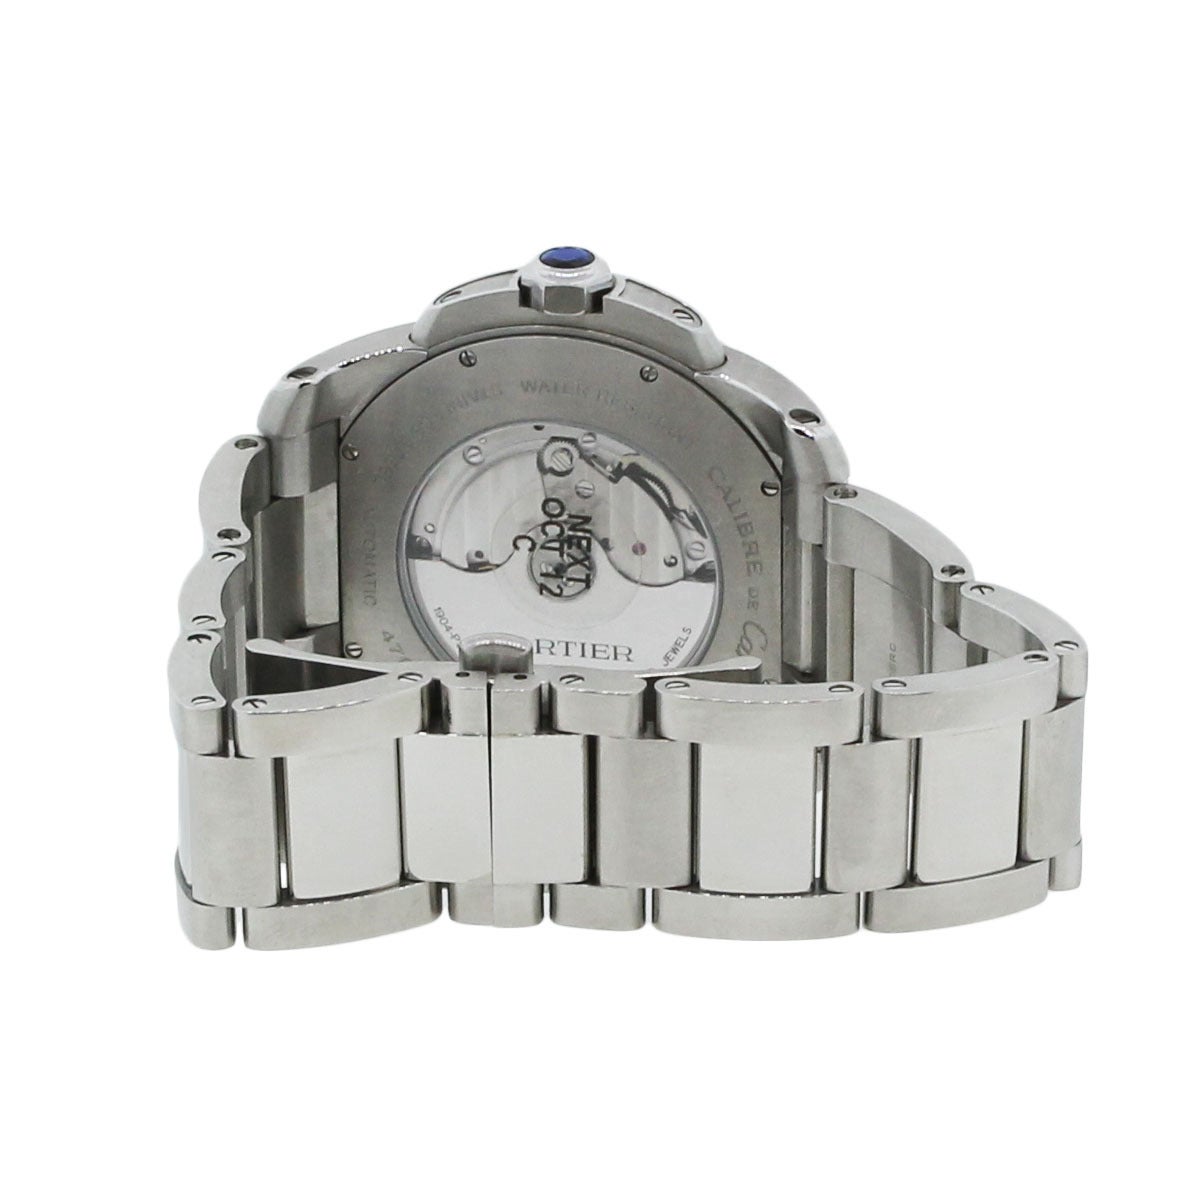 Men's Cartier Stainless Steel Calibre Chronograph Automatic Wristwatch Ref 3389